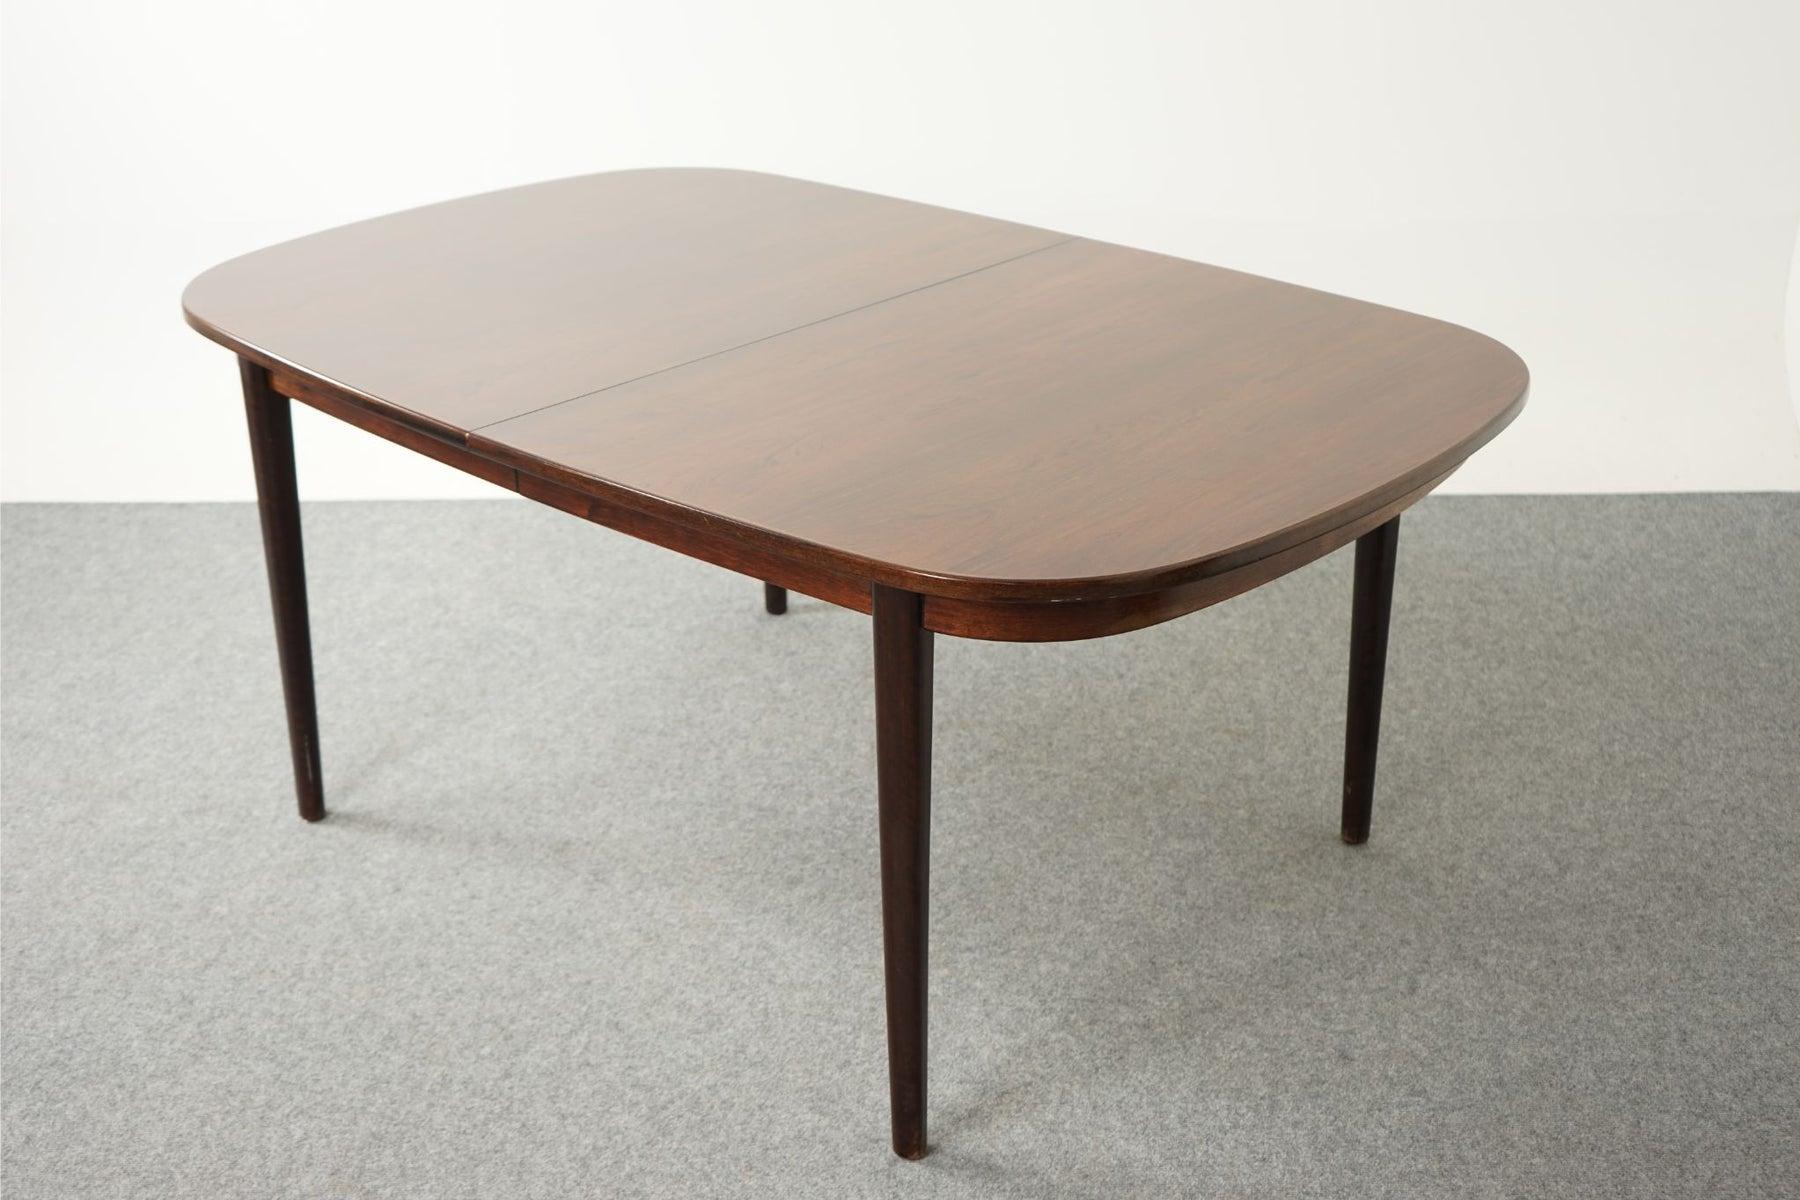 20th Century Mid-Century Scandinavian Rosewood Dining Table + Leaves